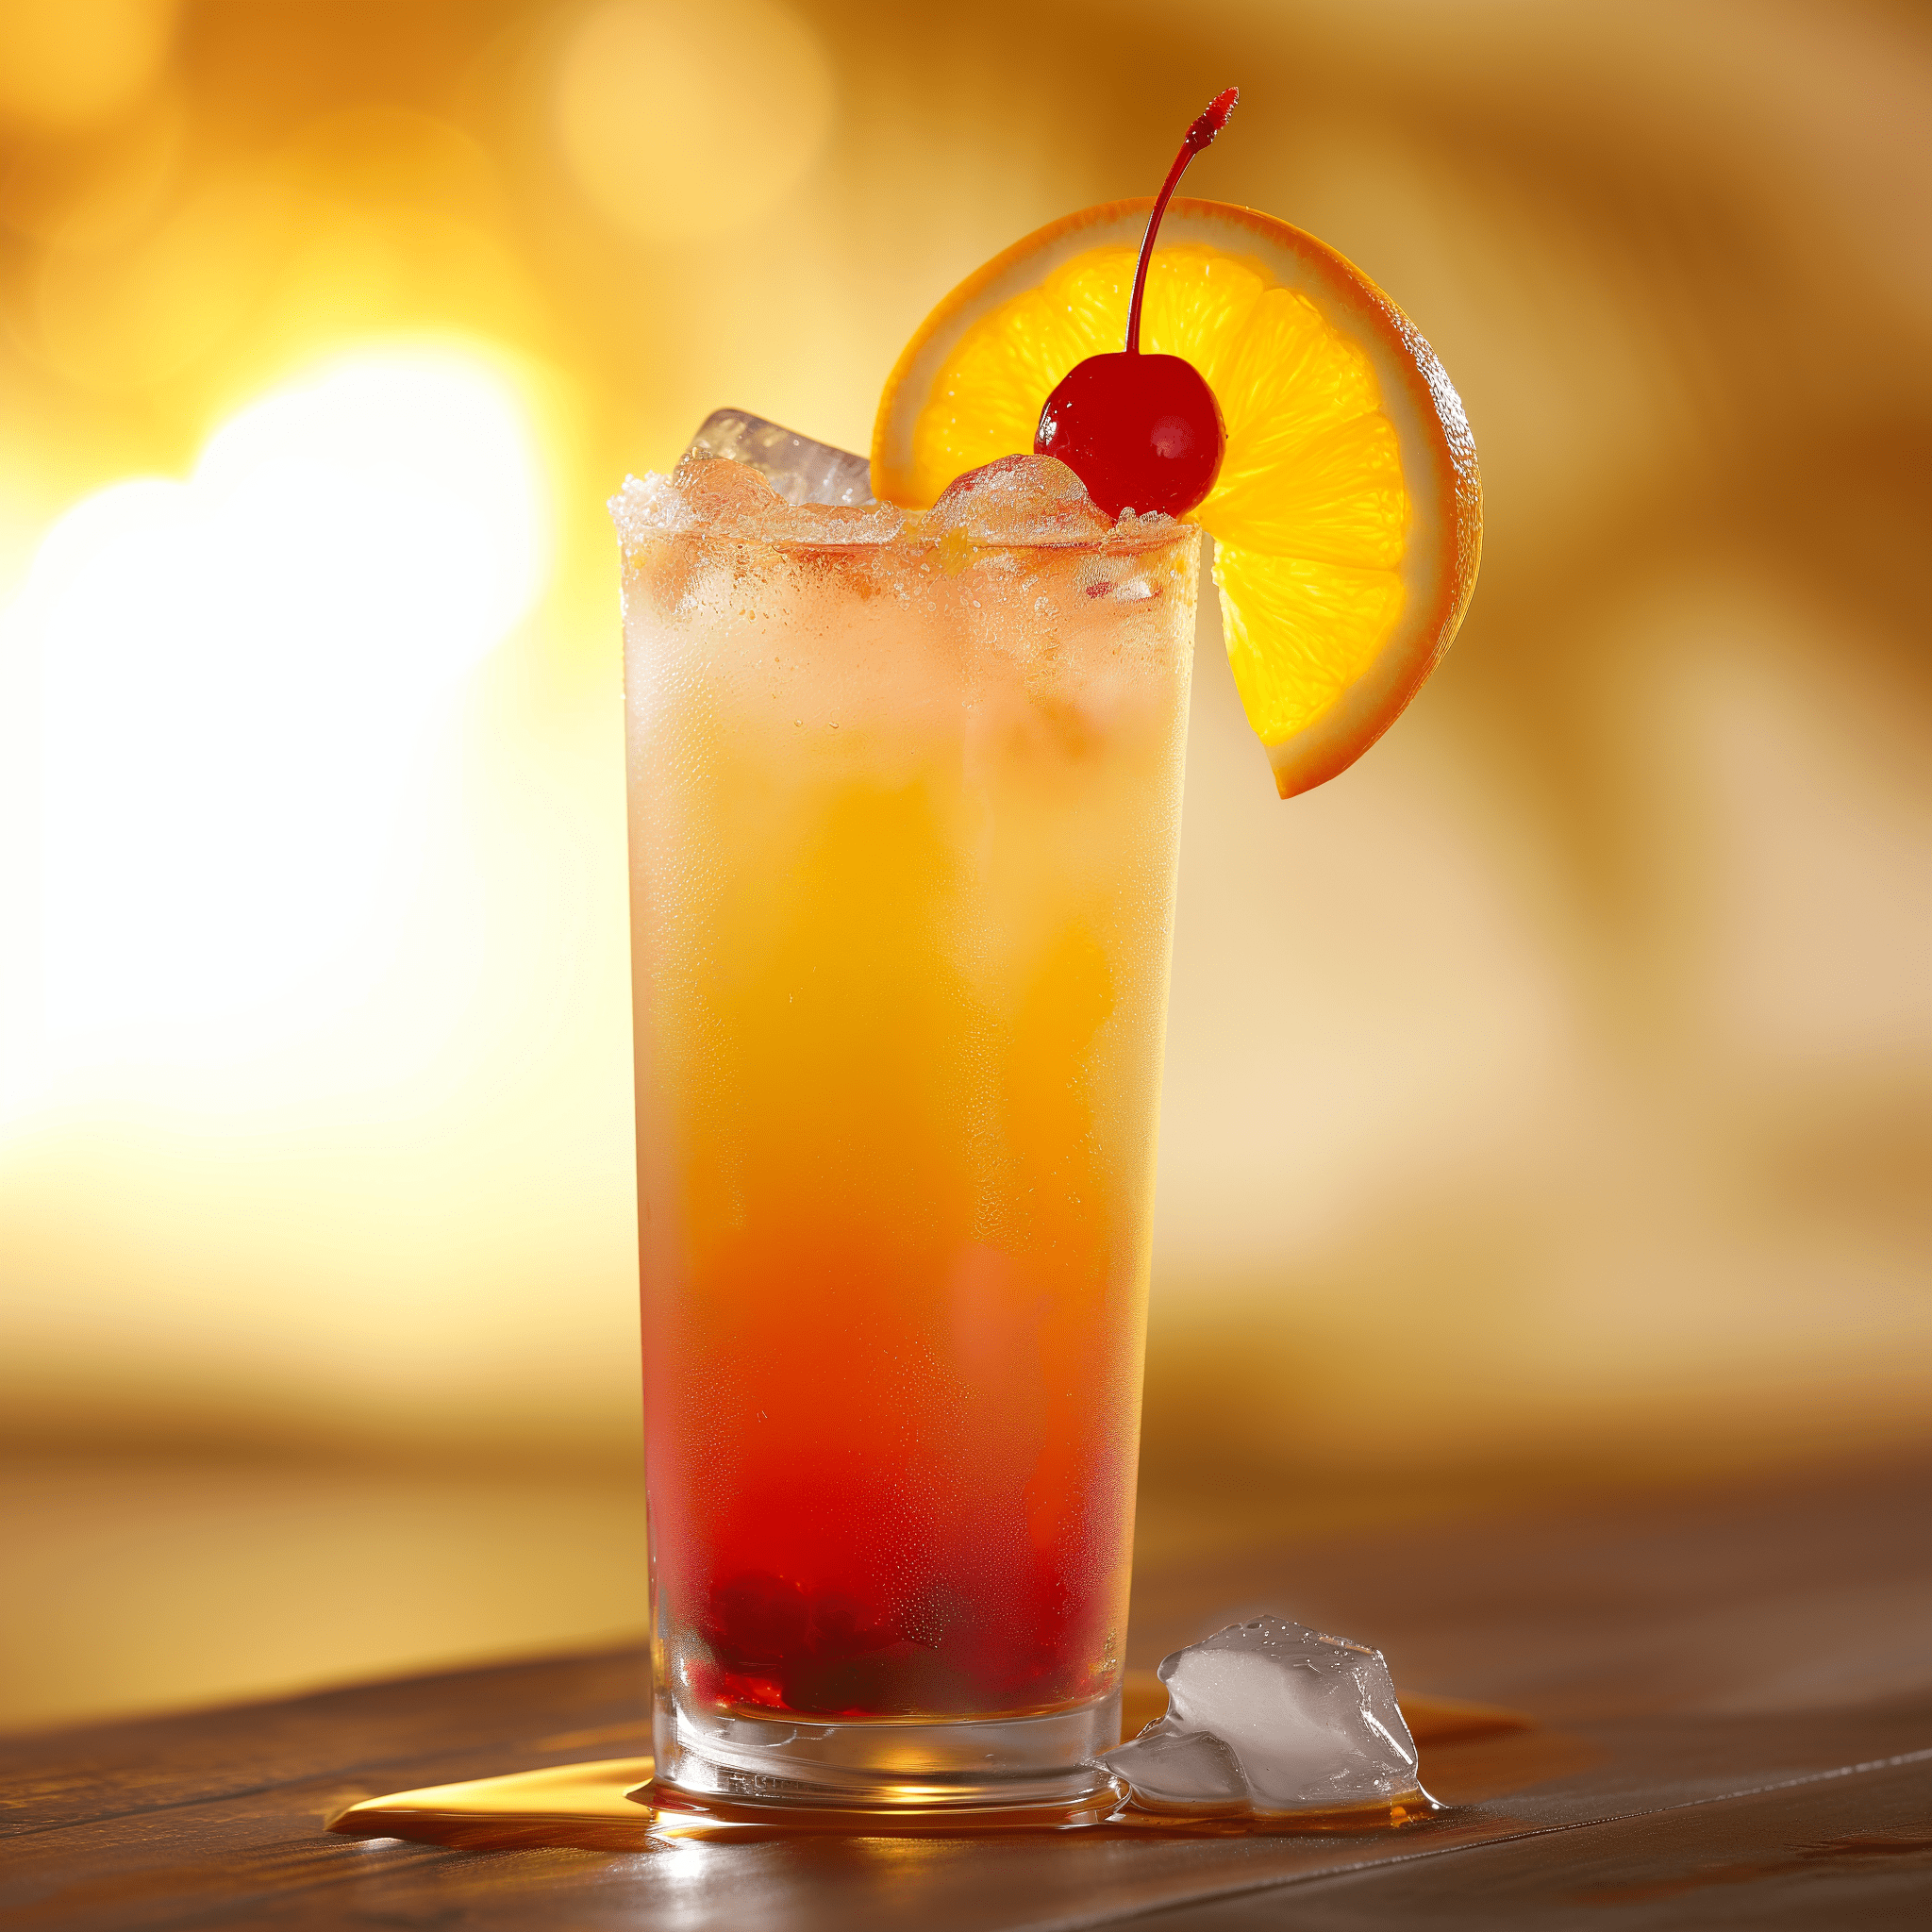 Sunrise Mocktail Recipe - The Sunrise Mocktail has a sweet and tangy flavor profile, with the freshness of orange juice and the tartness of grenadine creating a delightful balance. The drink is light and fruity, with a subtle complexity that comes from the layering of flavors.